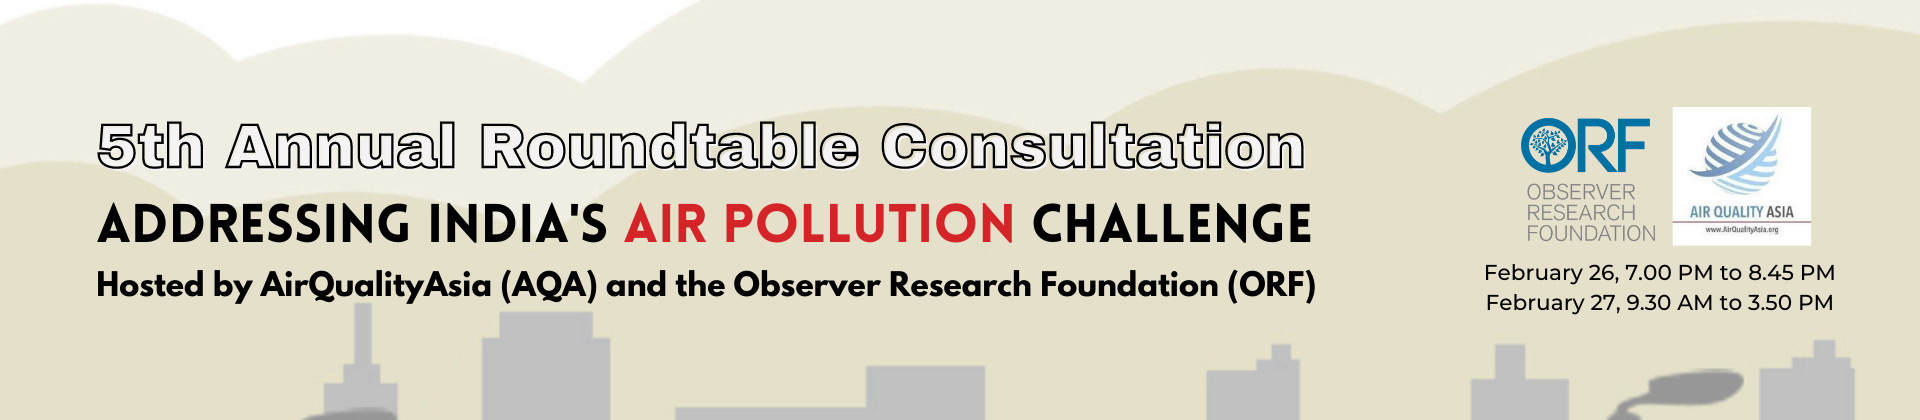 5th Annual Roundtable Consultation | Addressing India’s Air Pollution Challenge